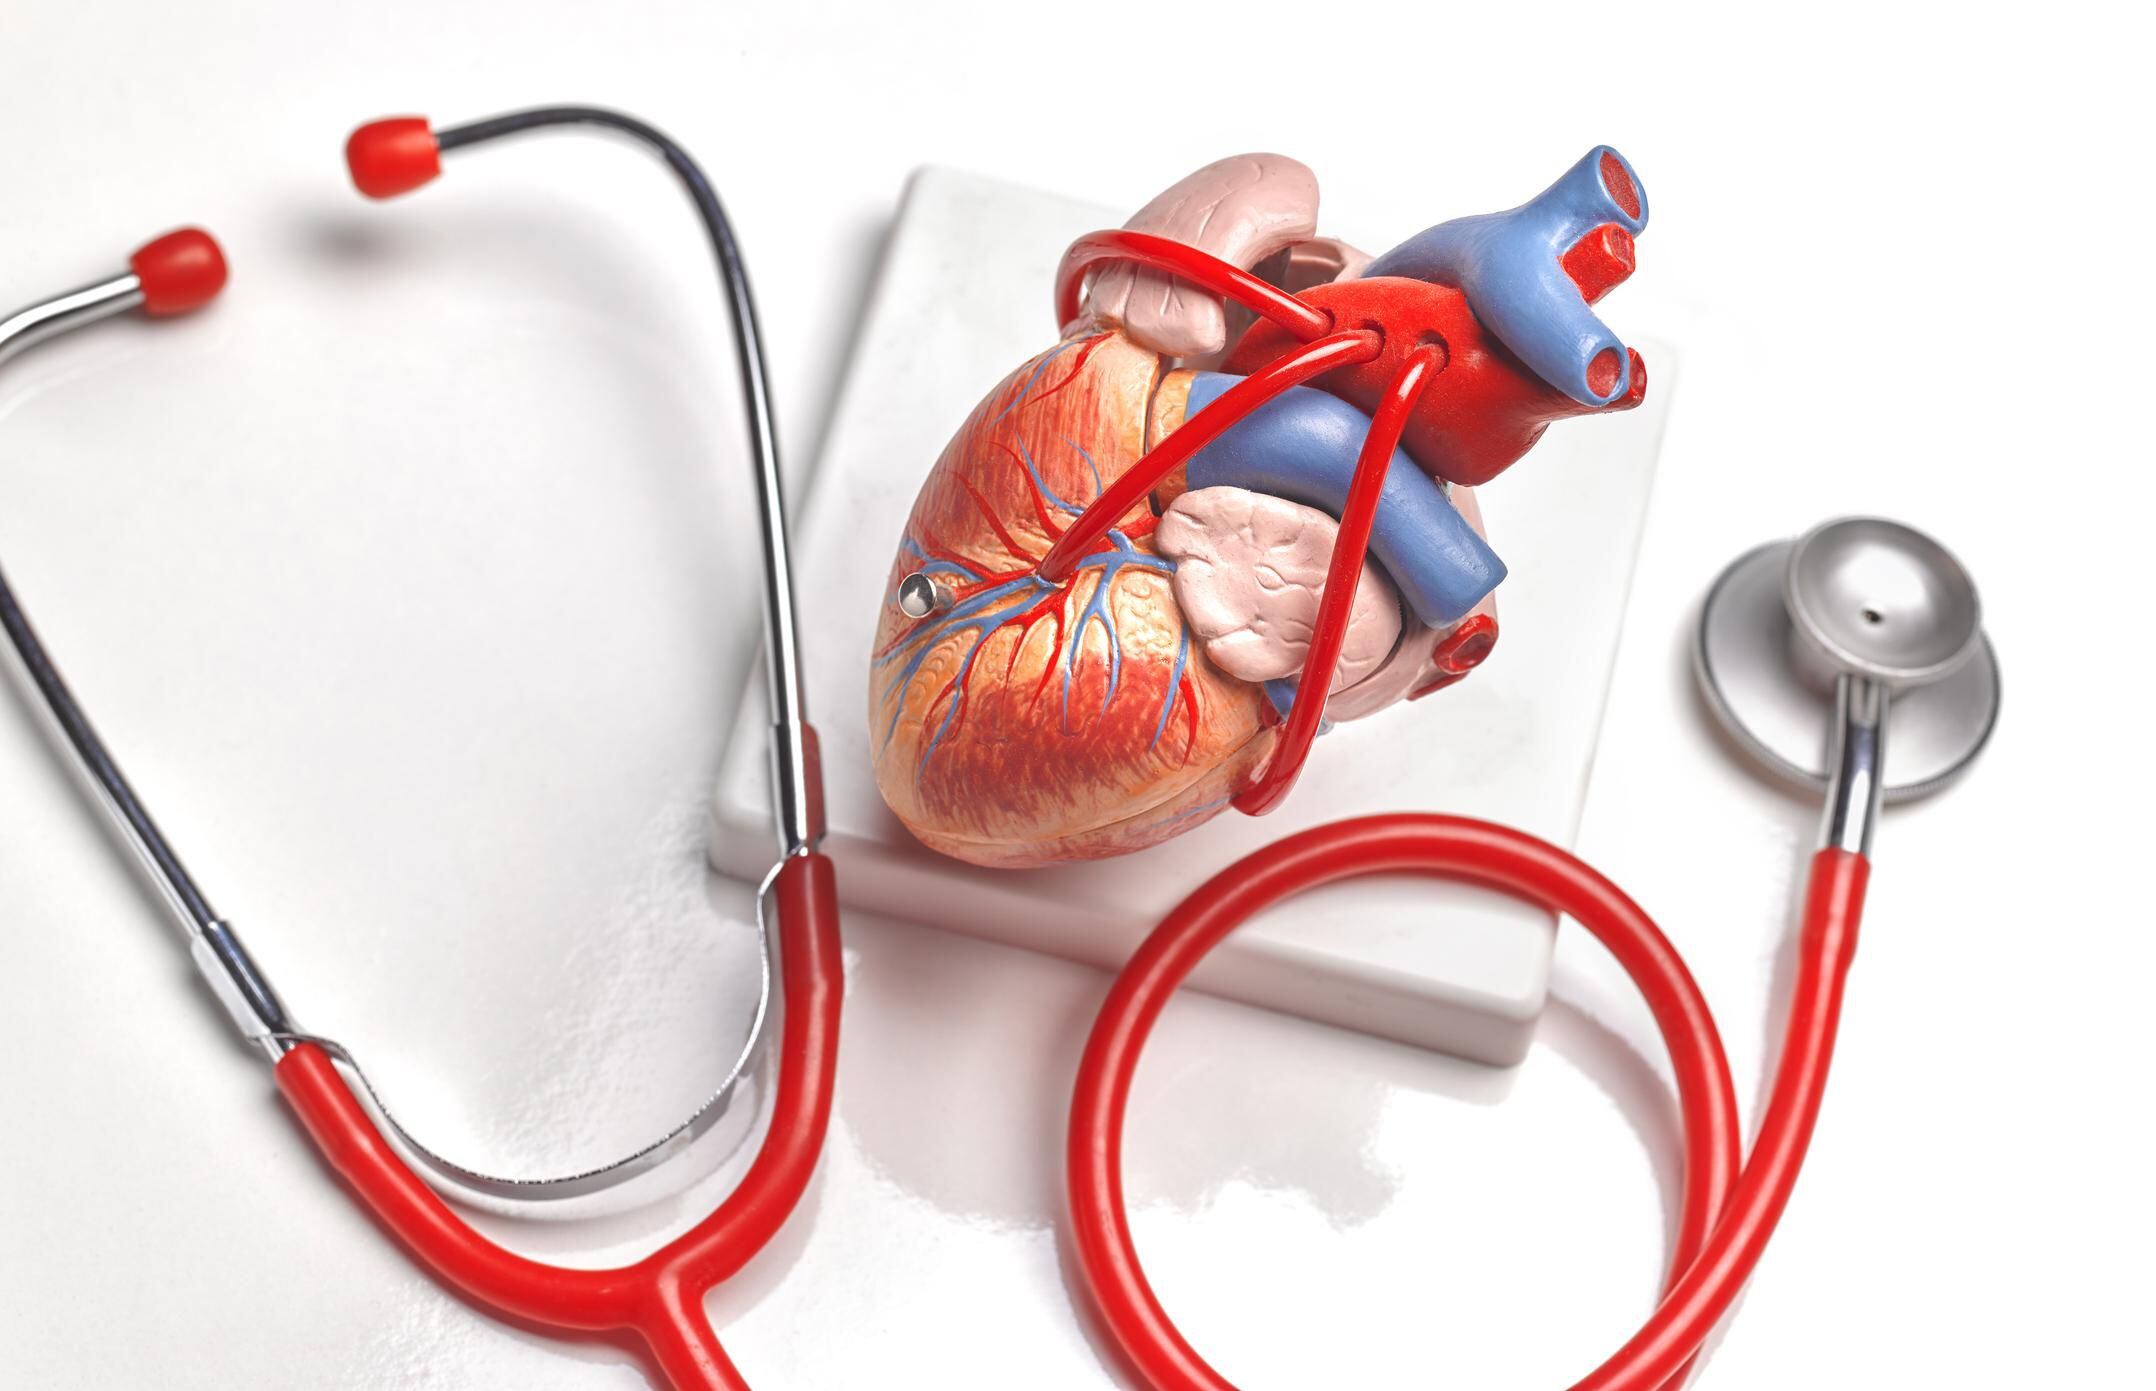 28,000 Scots suffer from heart problems, according to data from scientific authorities.